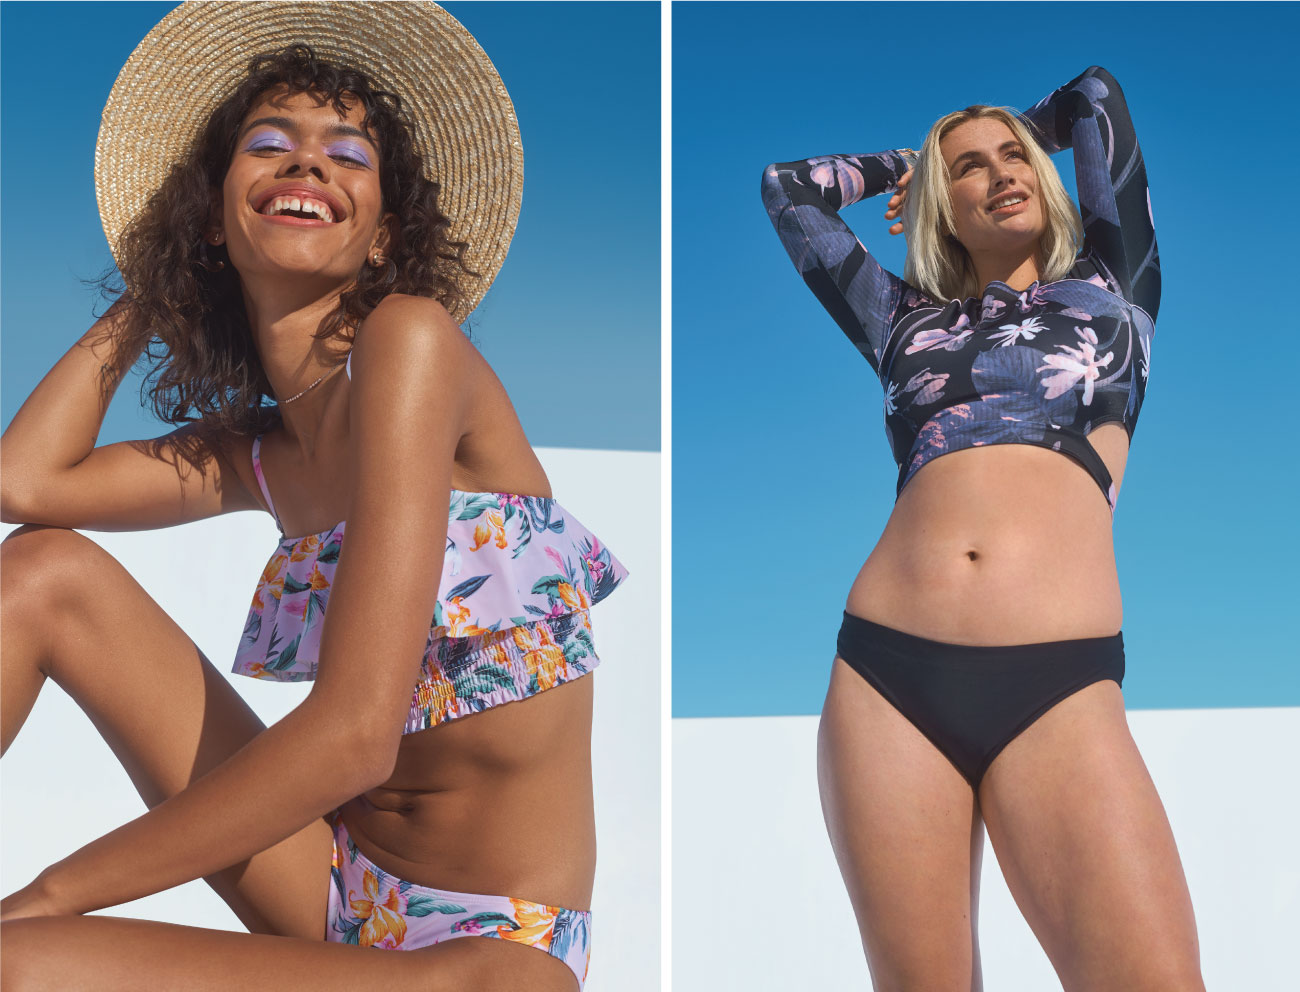 Two women wear floral swim suits, one a ruffled floral bikini and one a long-sleeve floral bikini